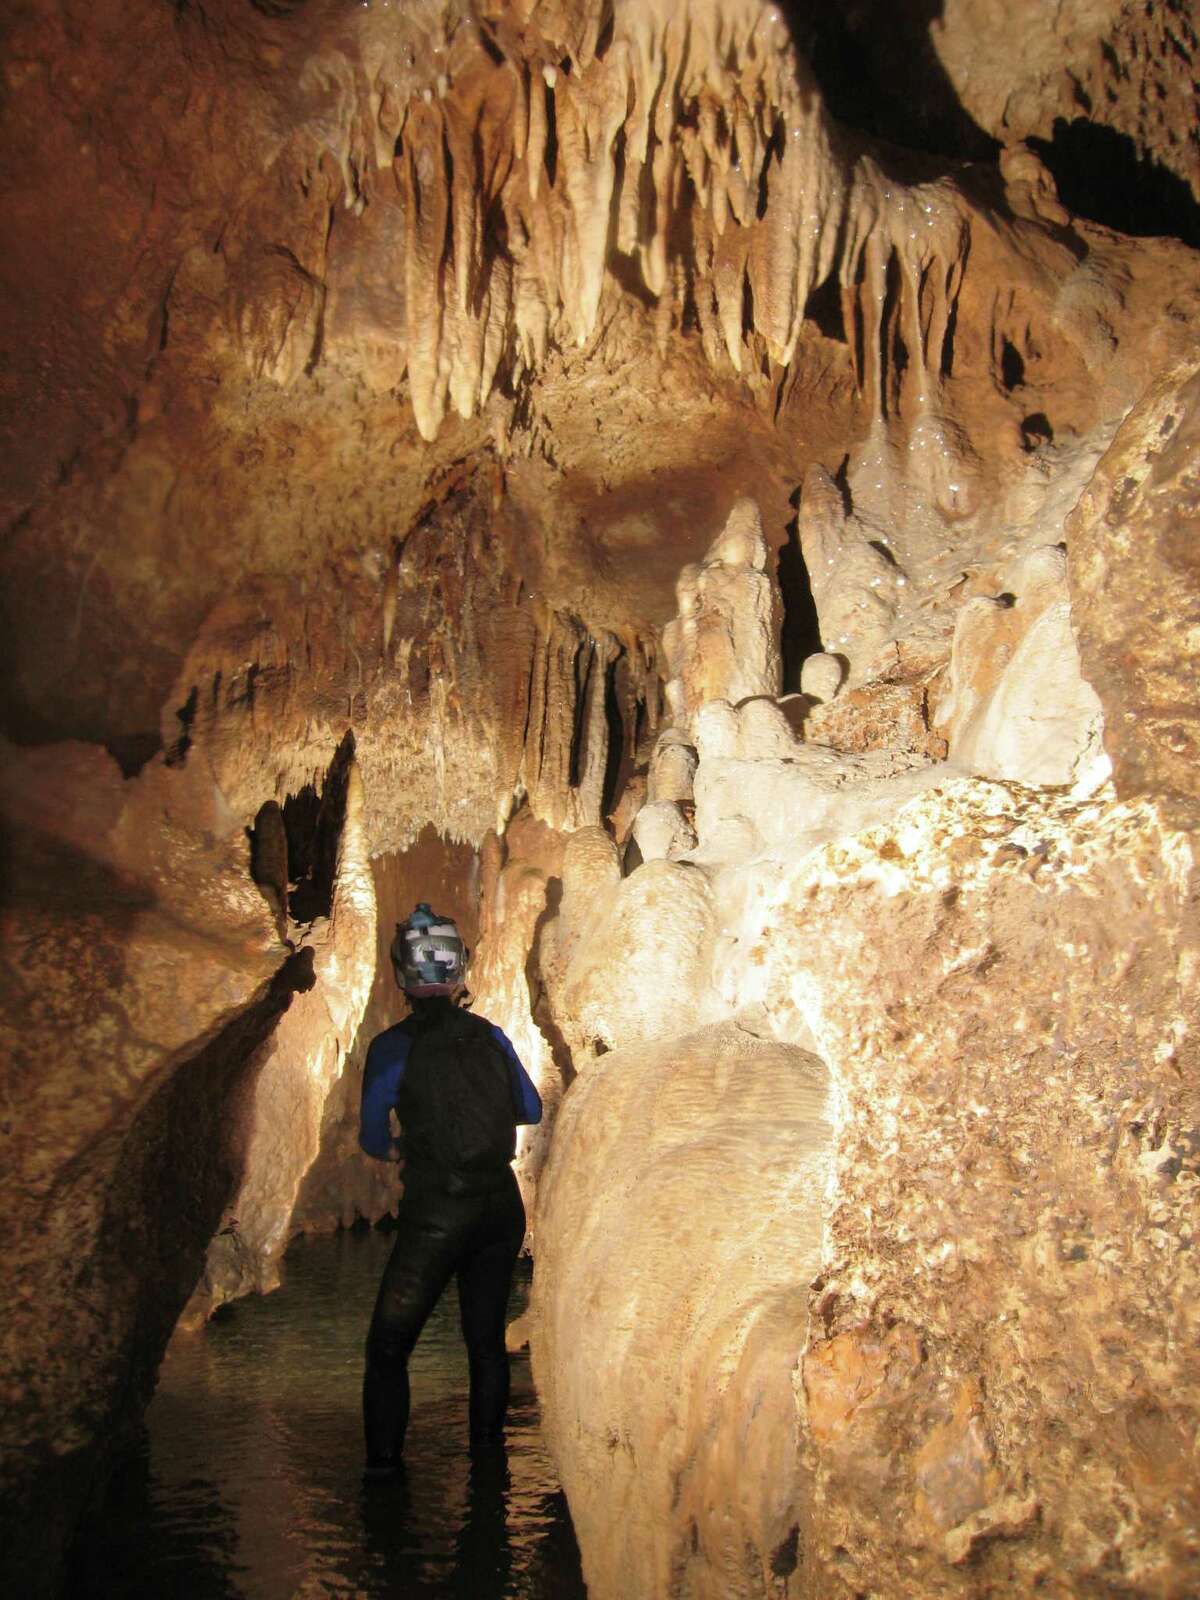 Go inside Honey Creek Cave, the longest known cave in Texas